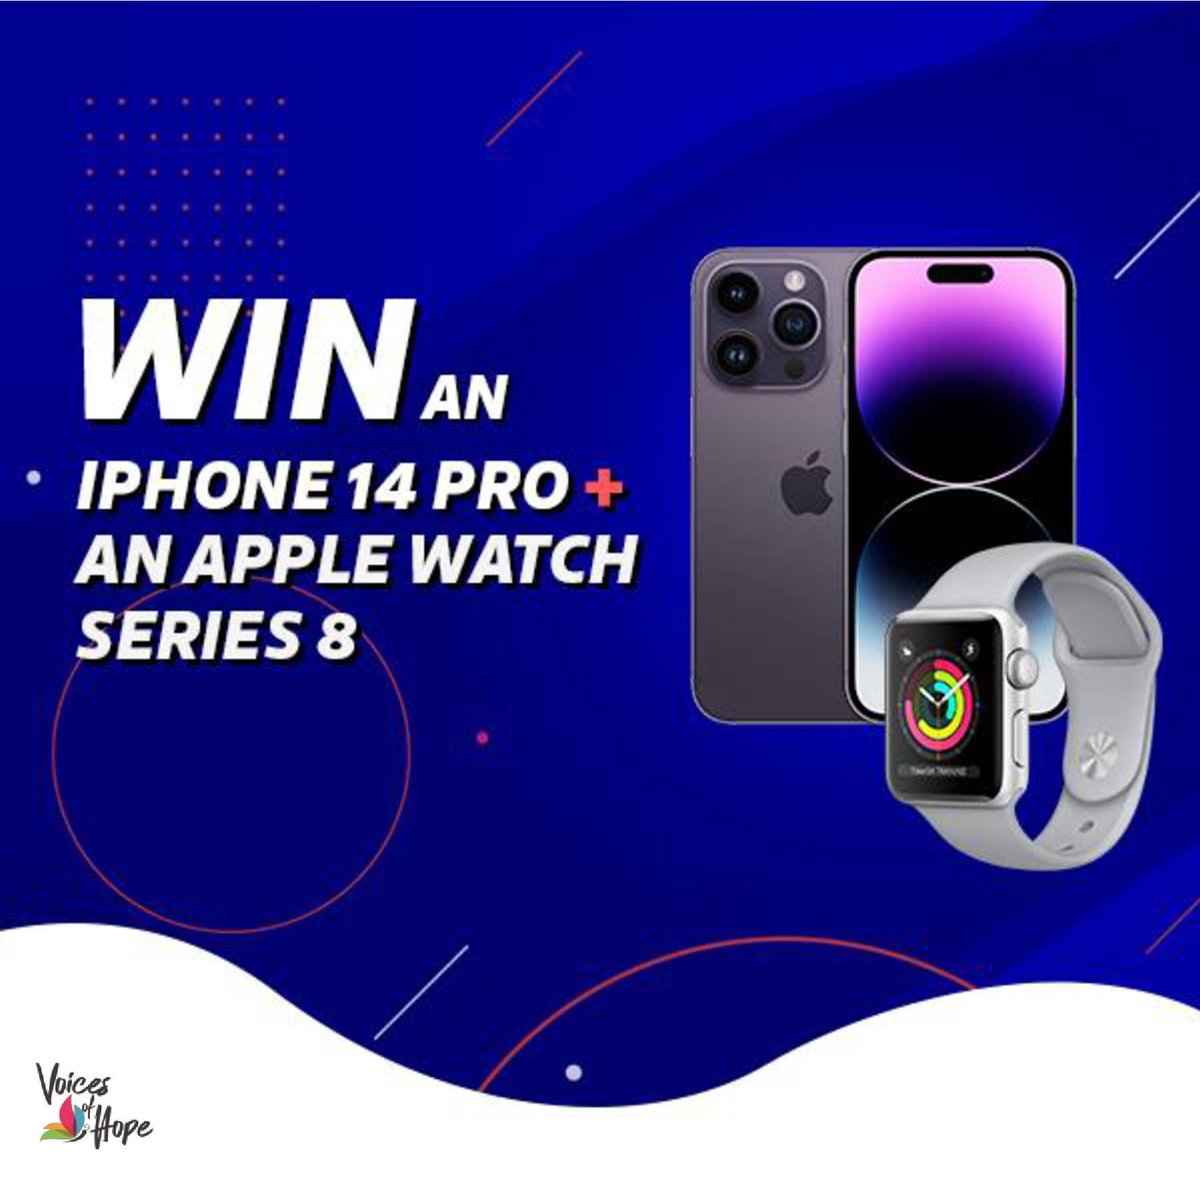 We’re giving you the chance to win an amazing Apple tech bundle - a top-of-the-line iPhone 14 Pro, and an Apple Watch Series 8! Sign up here for a chance to win: kingstonlottery.co.uk/support/voices…